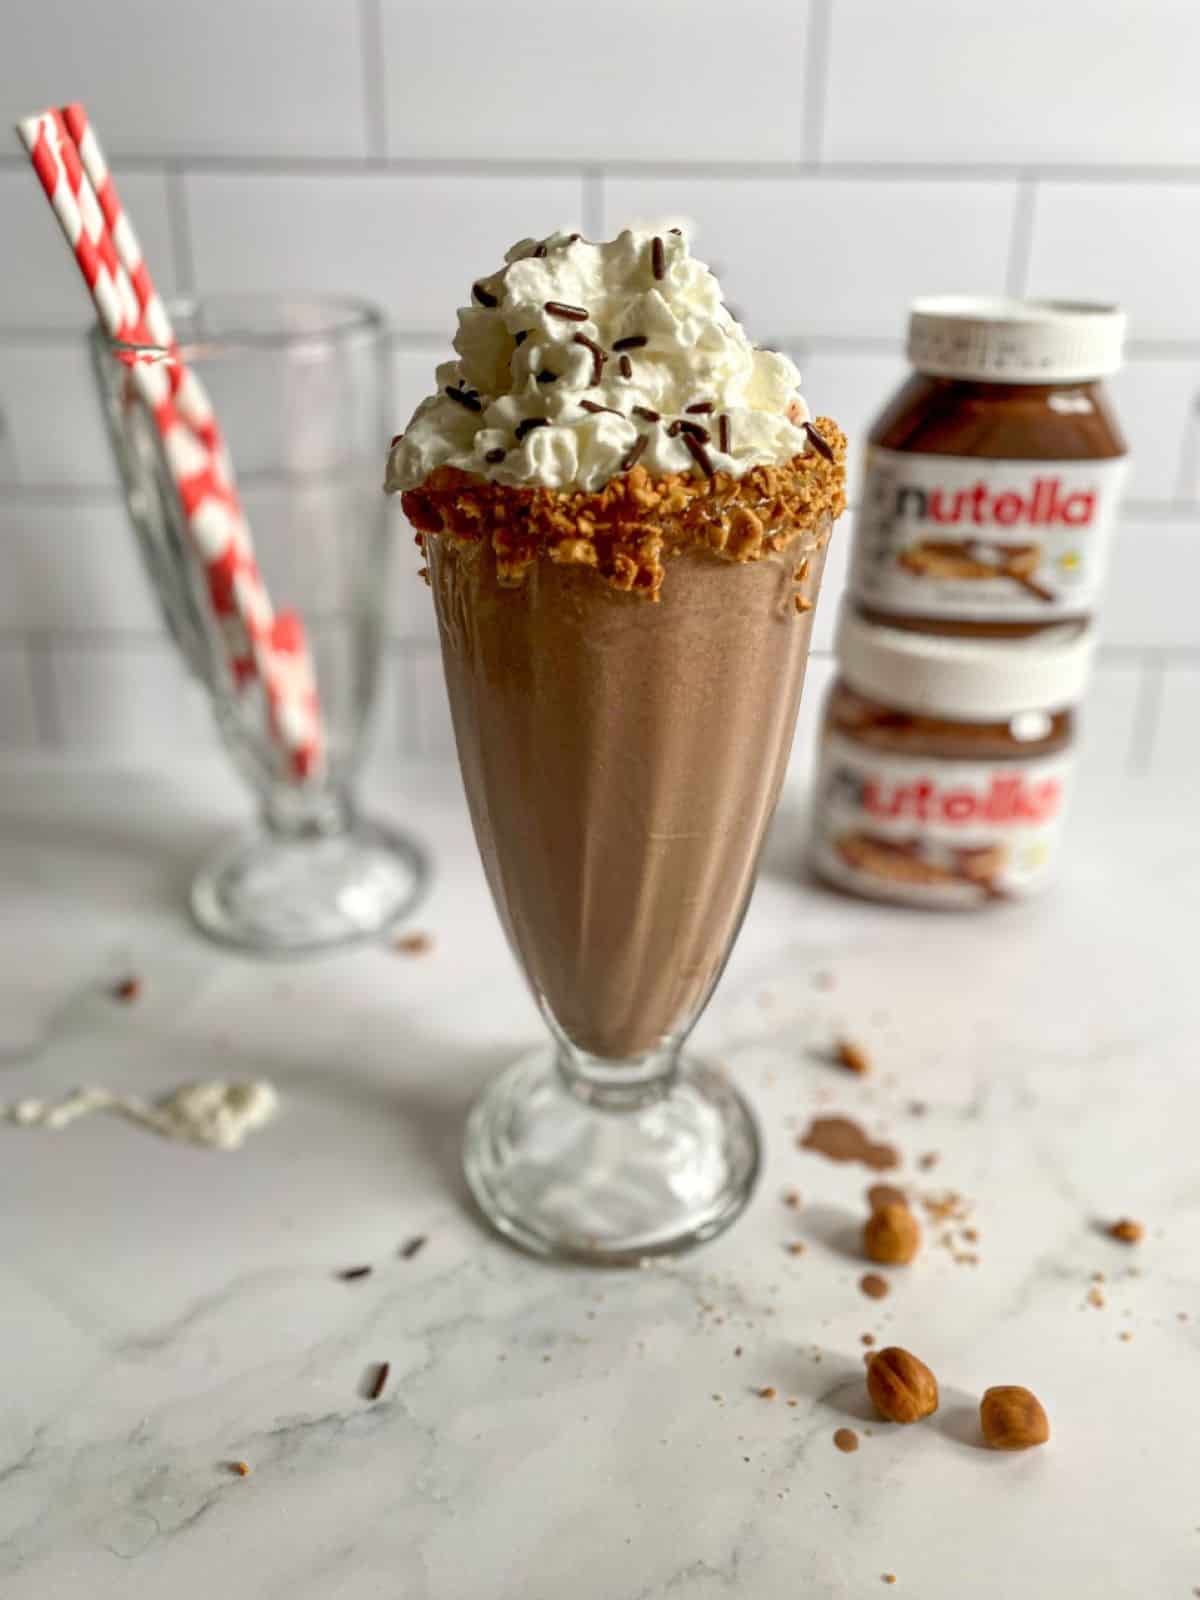 Nutella milkshake in a clear glass topped with whipped cream and sprinkles in a tall old fashioned milkshake glass. Jars of Nutella and red straws are in the background.